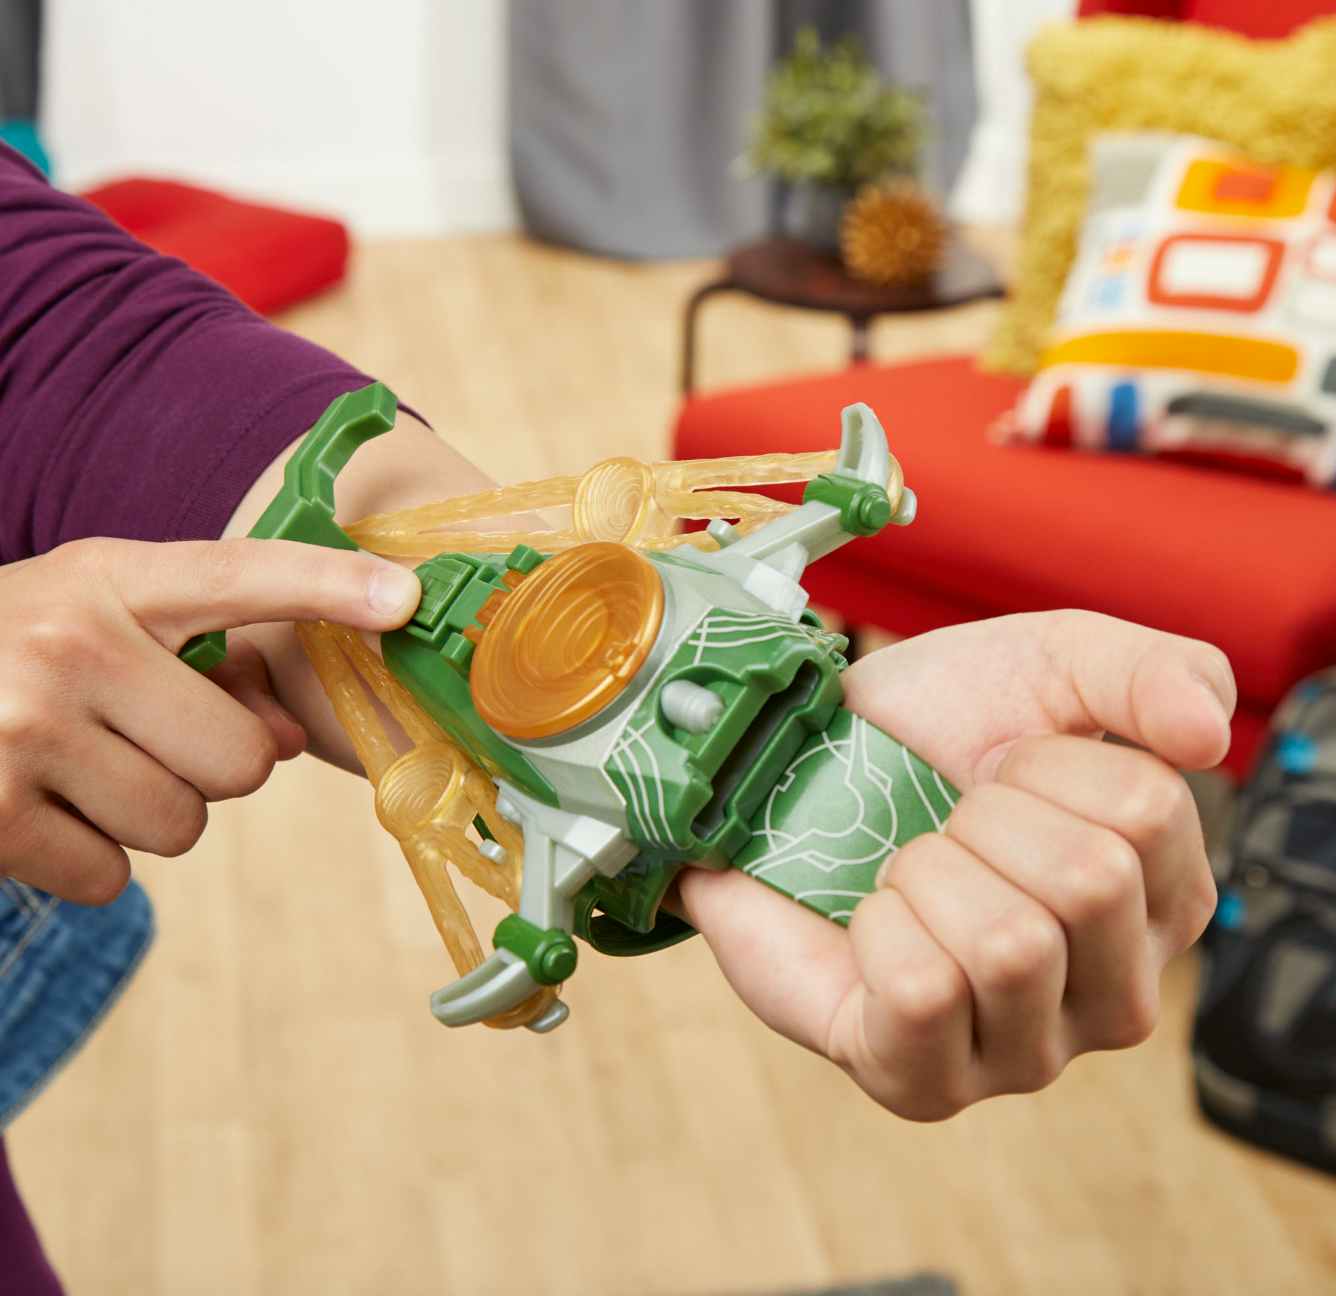 a marvel toy that goes around your wrist and launches discs